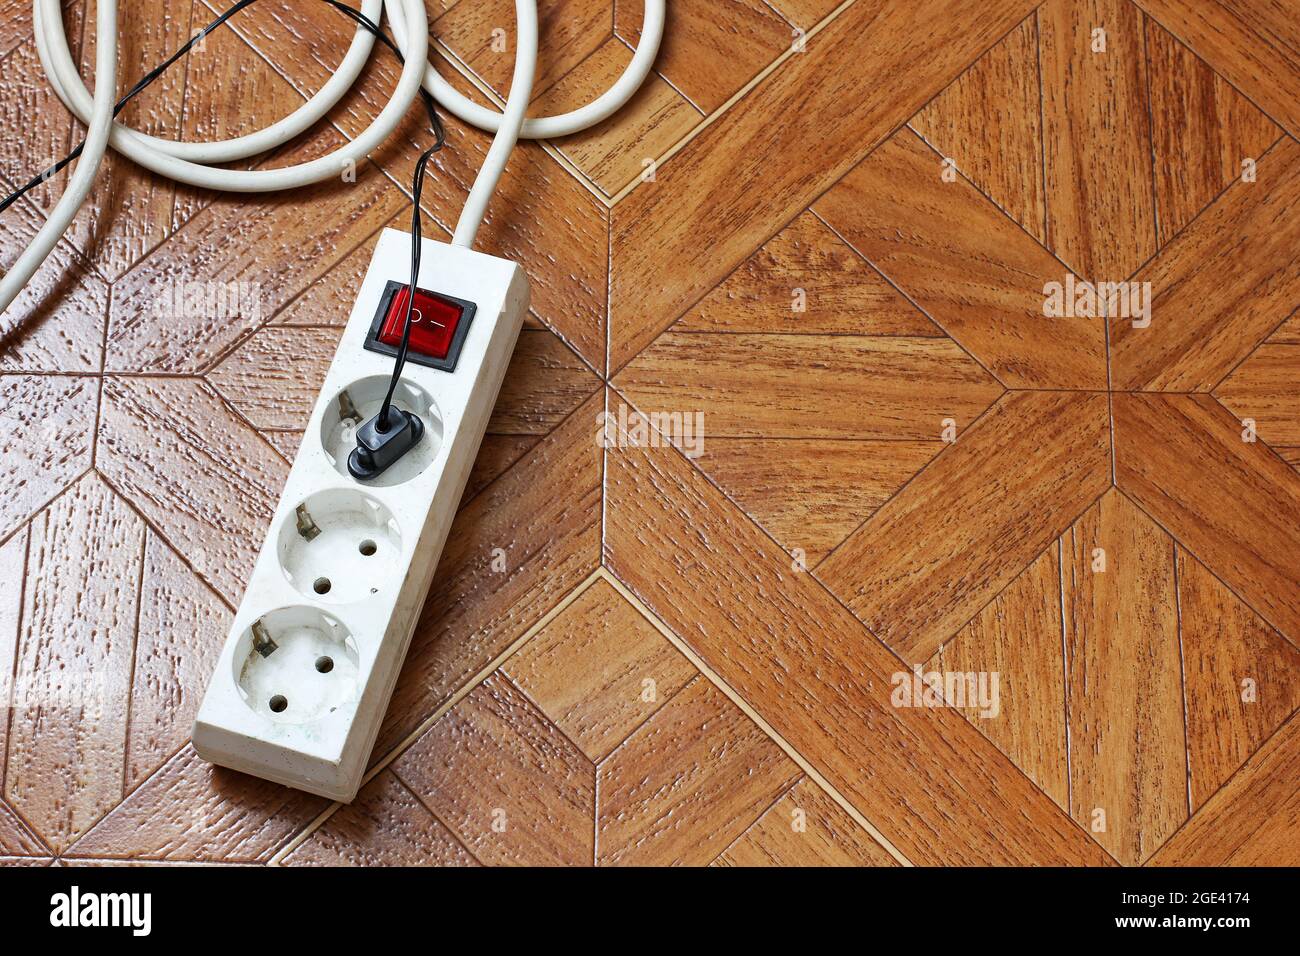 extension cord On the floor. Stock Photo